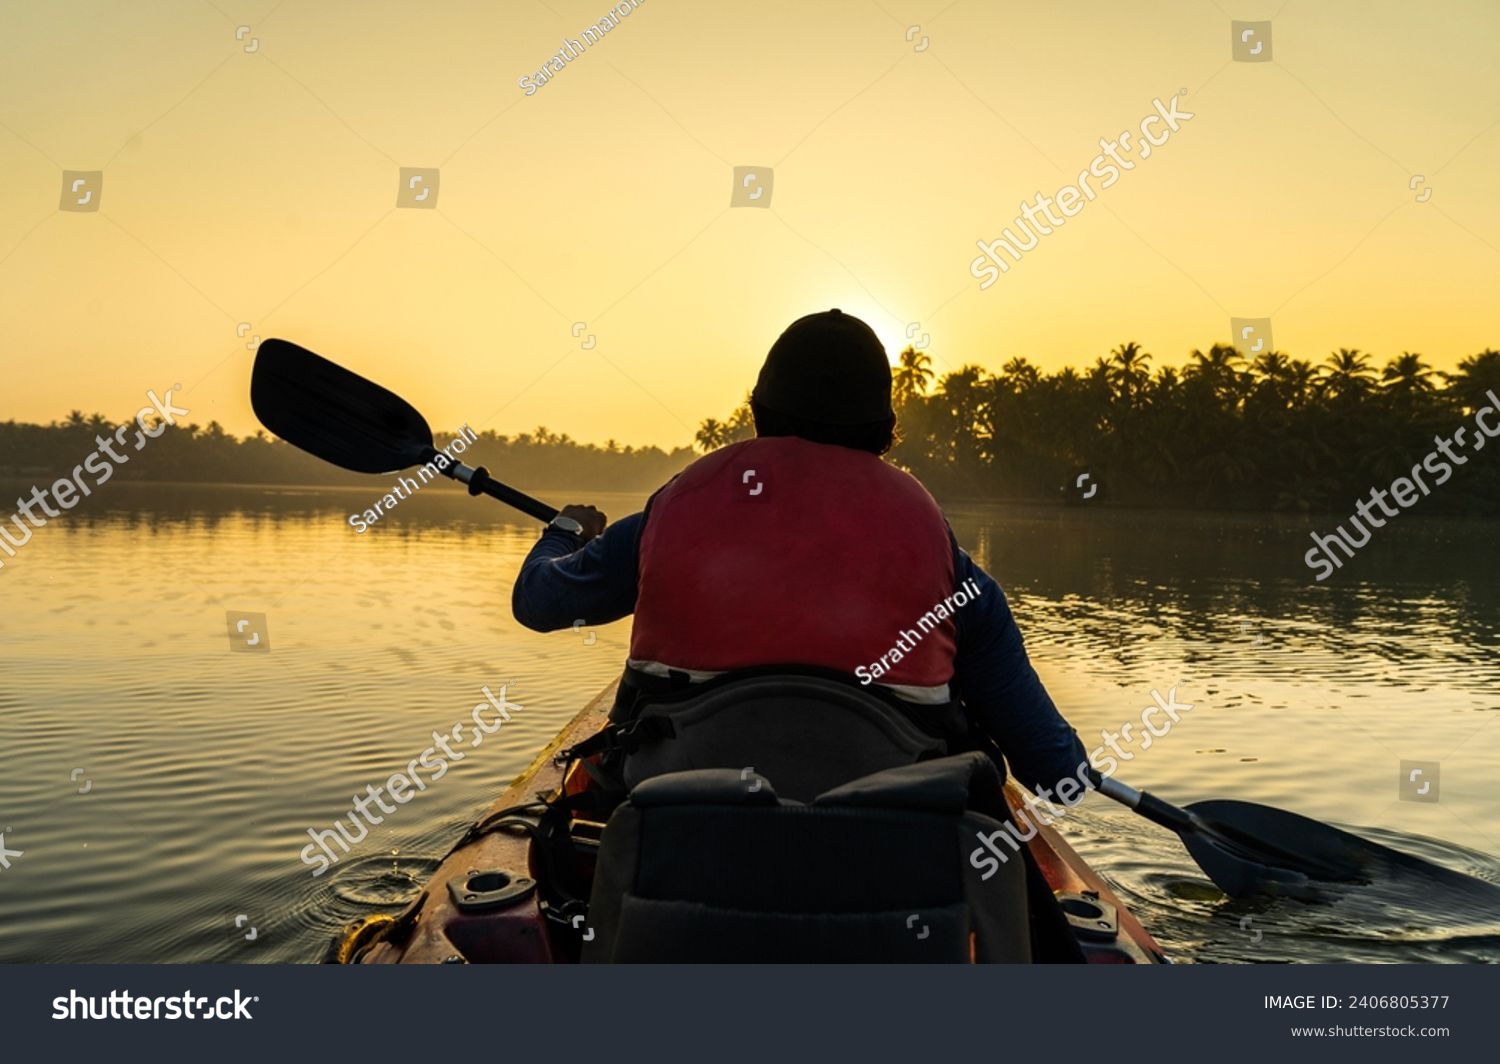 Kayaking on the river during sunrise, young man canoeing in Kavvayi Island Kannur, Kerala backwaters adventure activities  #2406805377